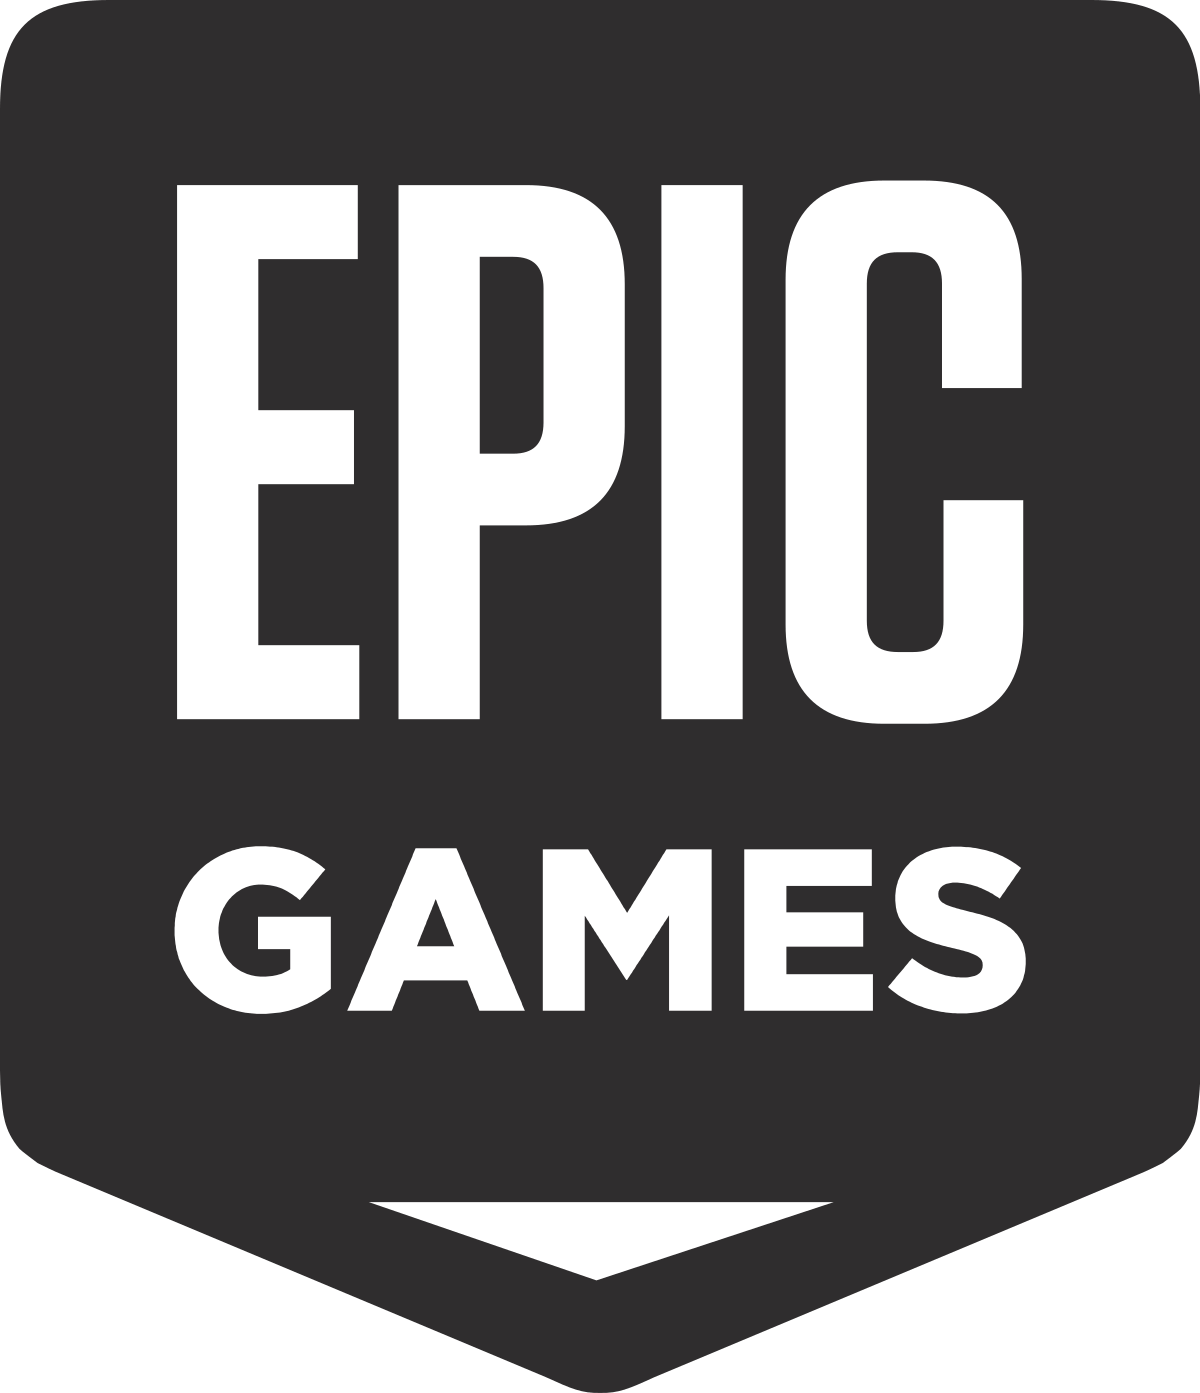 Games of Epic Games Logo - List of games by Epic Games